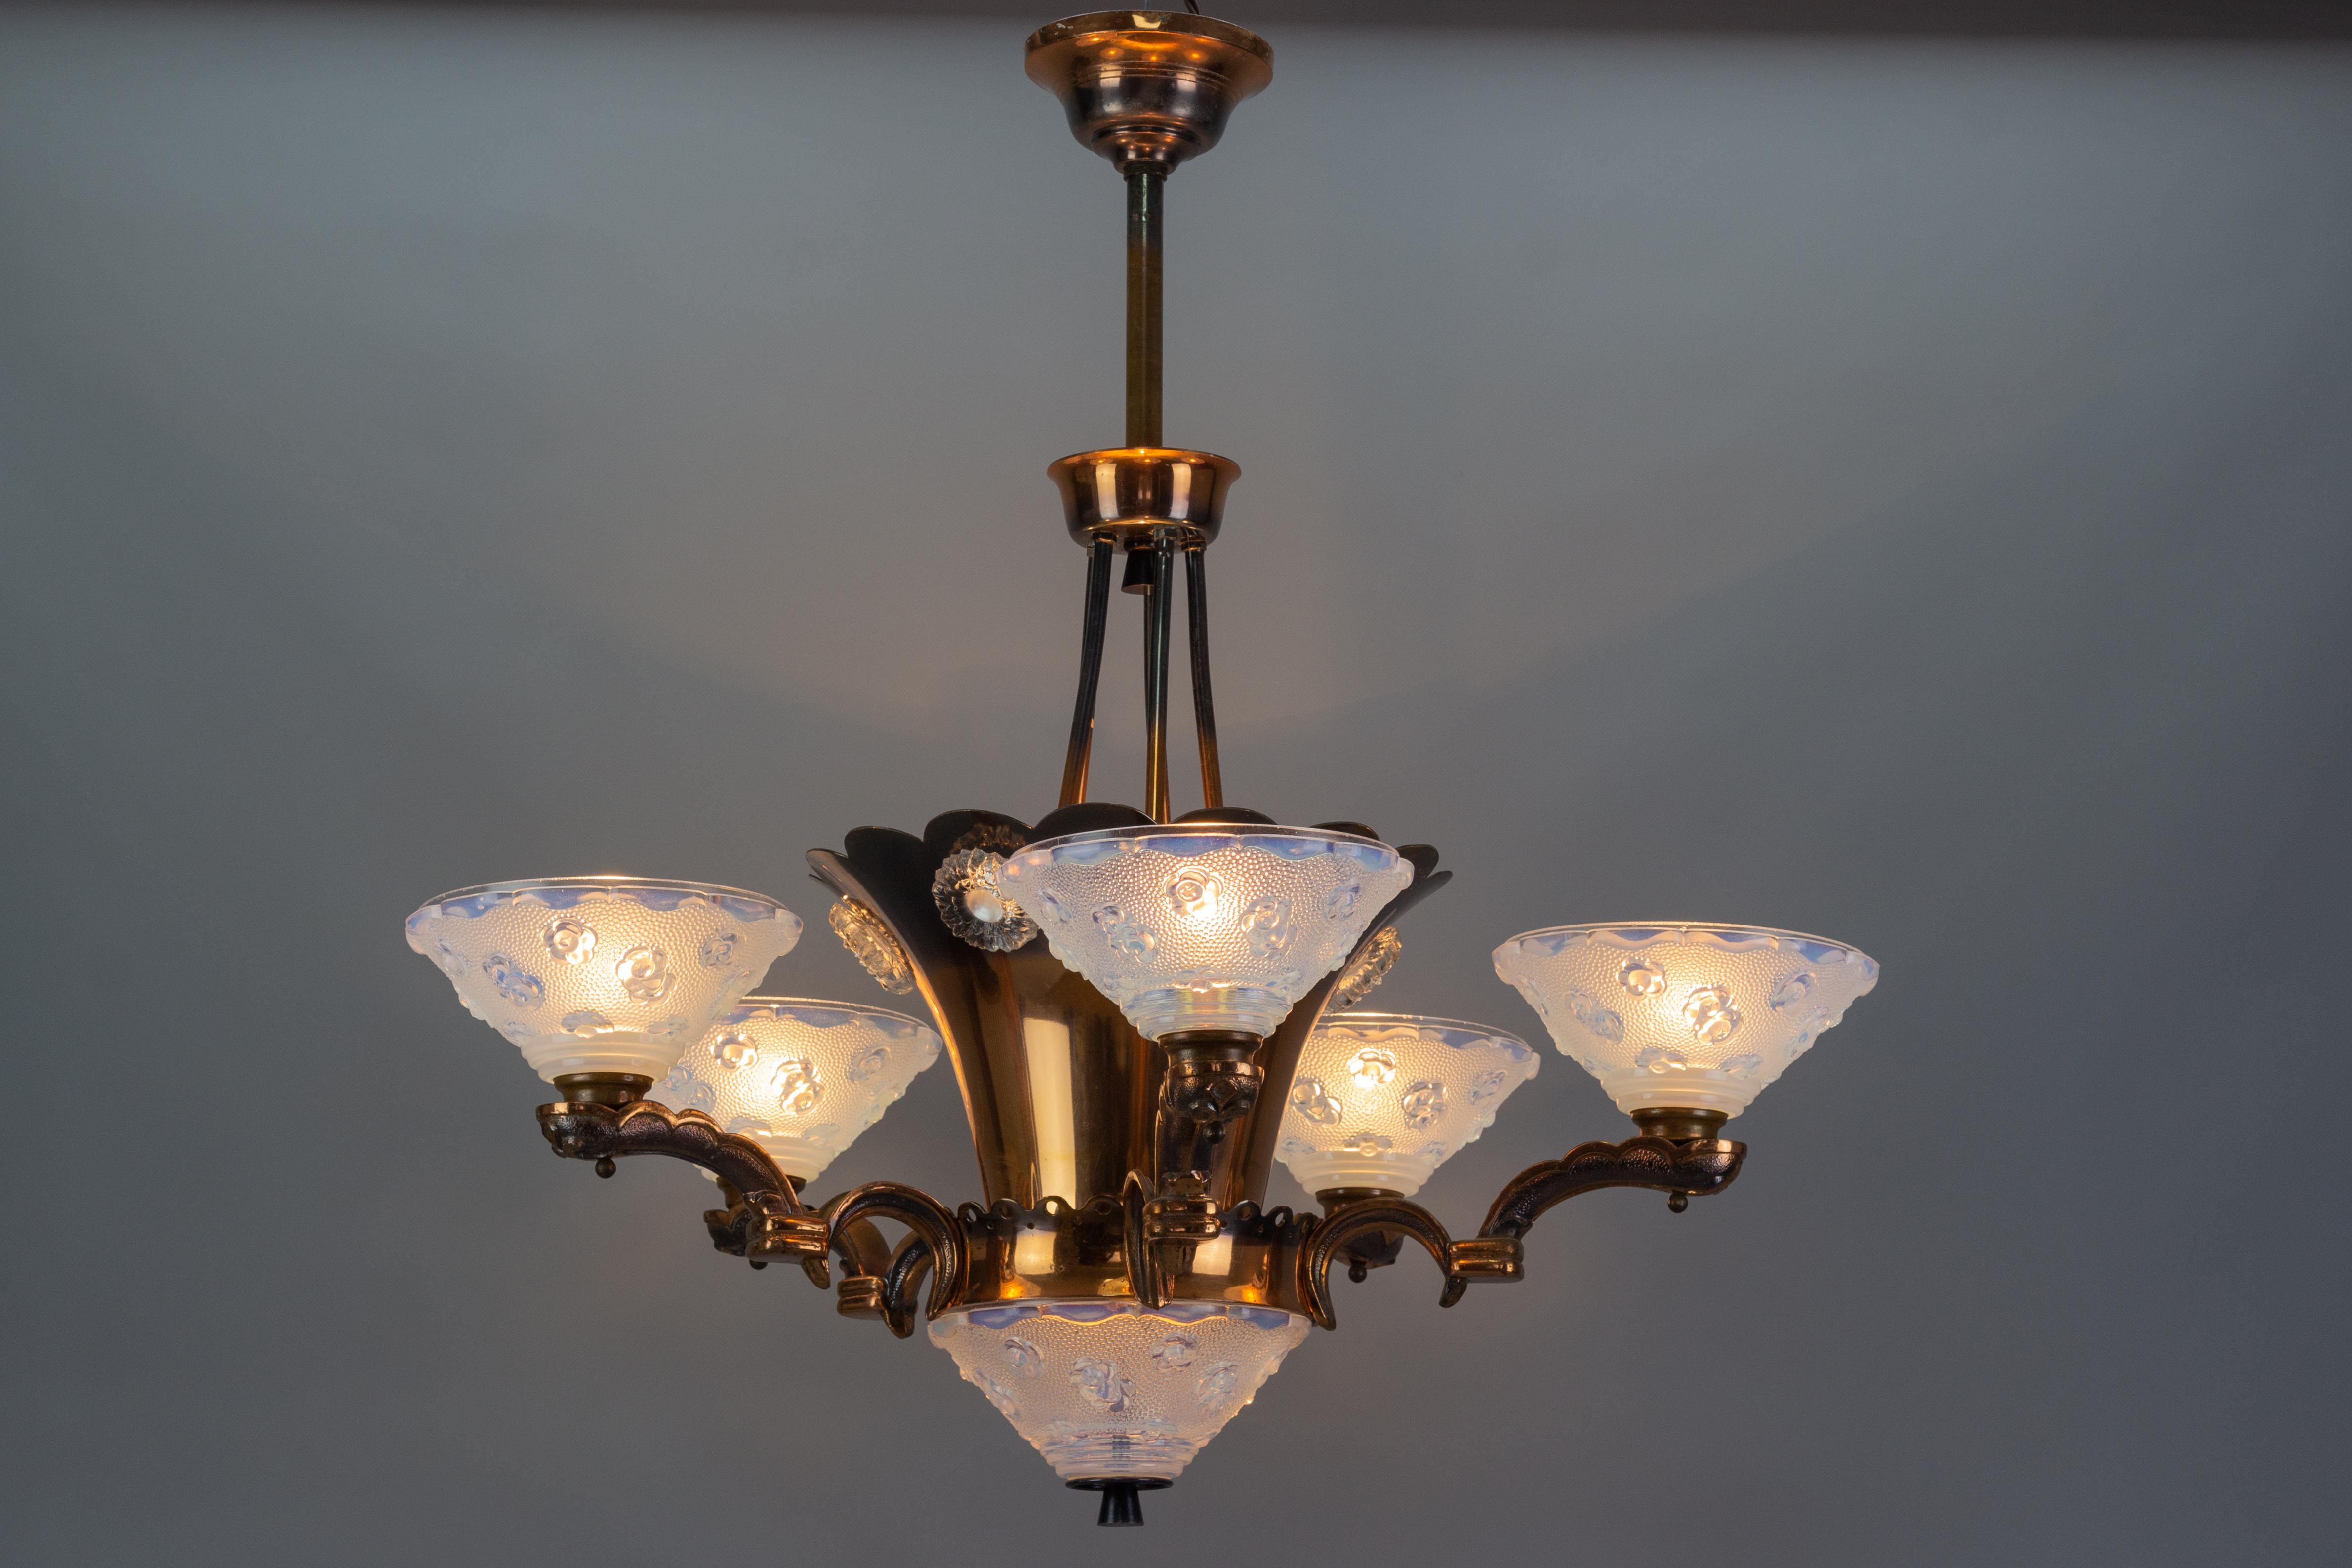 Mid-20th Century French Art Deco Copper and Opalescent Glass Floral Chandelier by Ezan, 1930s